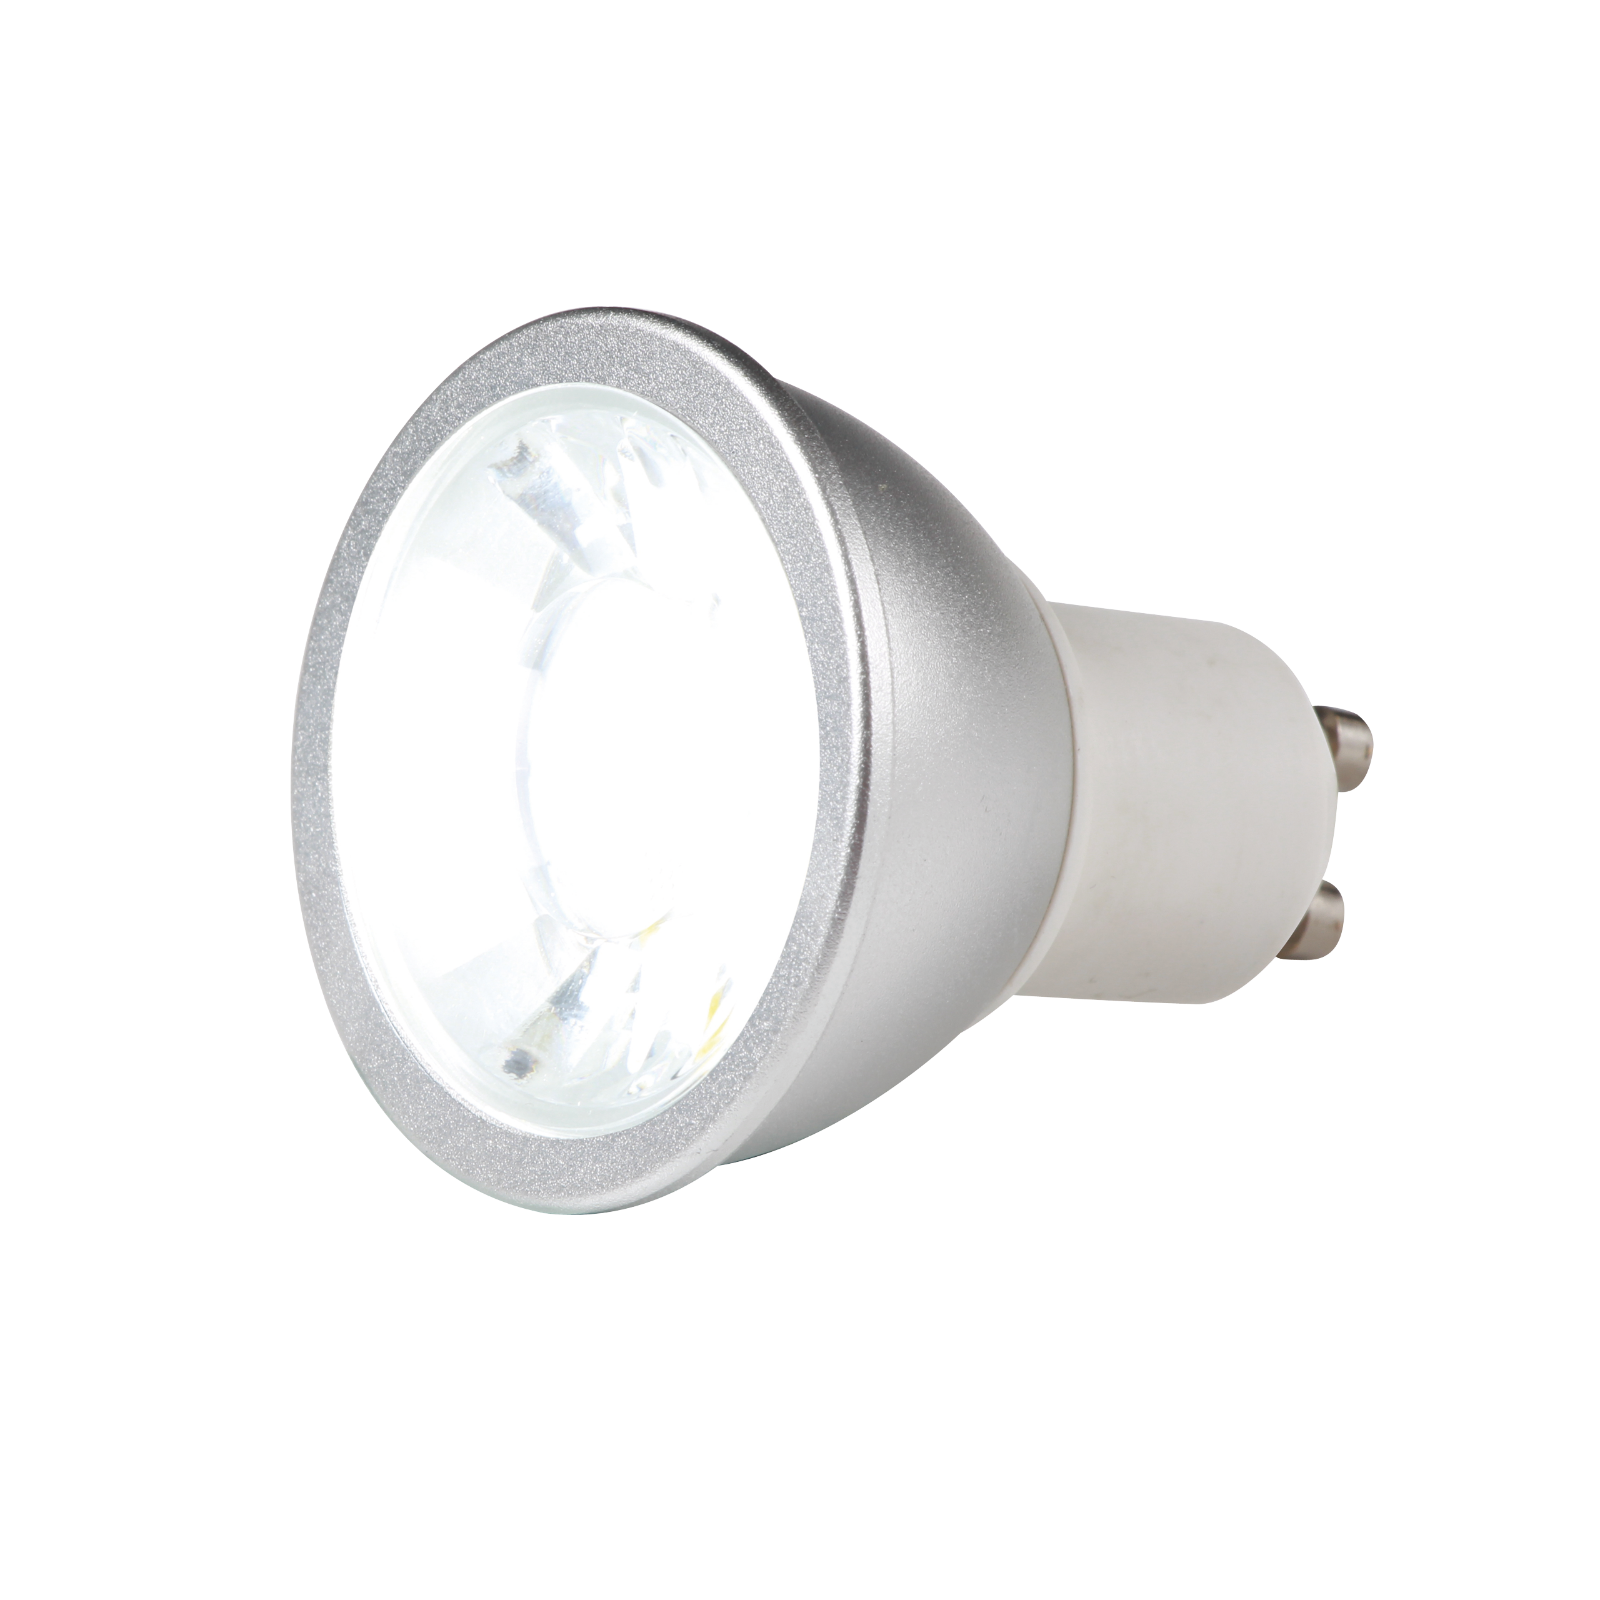 230V GU10 LED 7W Daylight 6000K (dimmable) - GUCOB7DL 